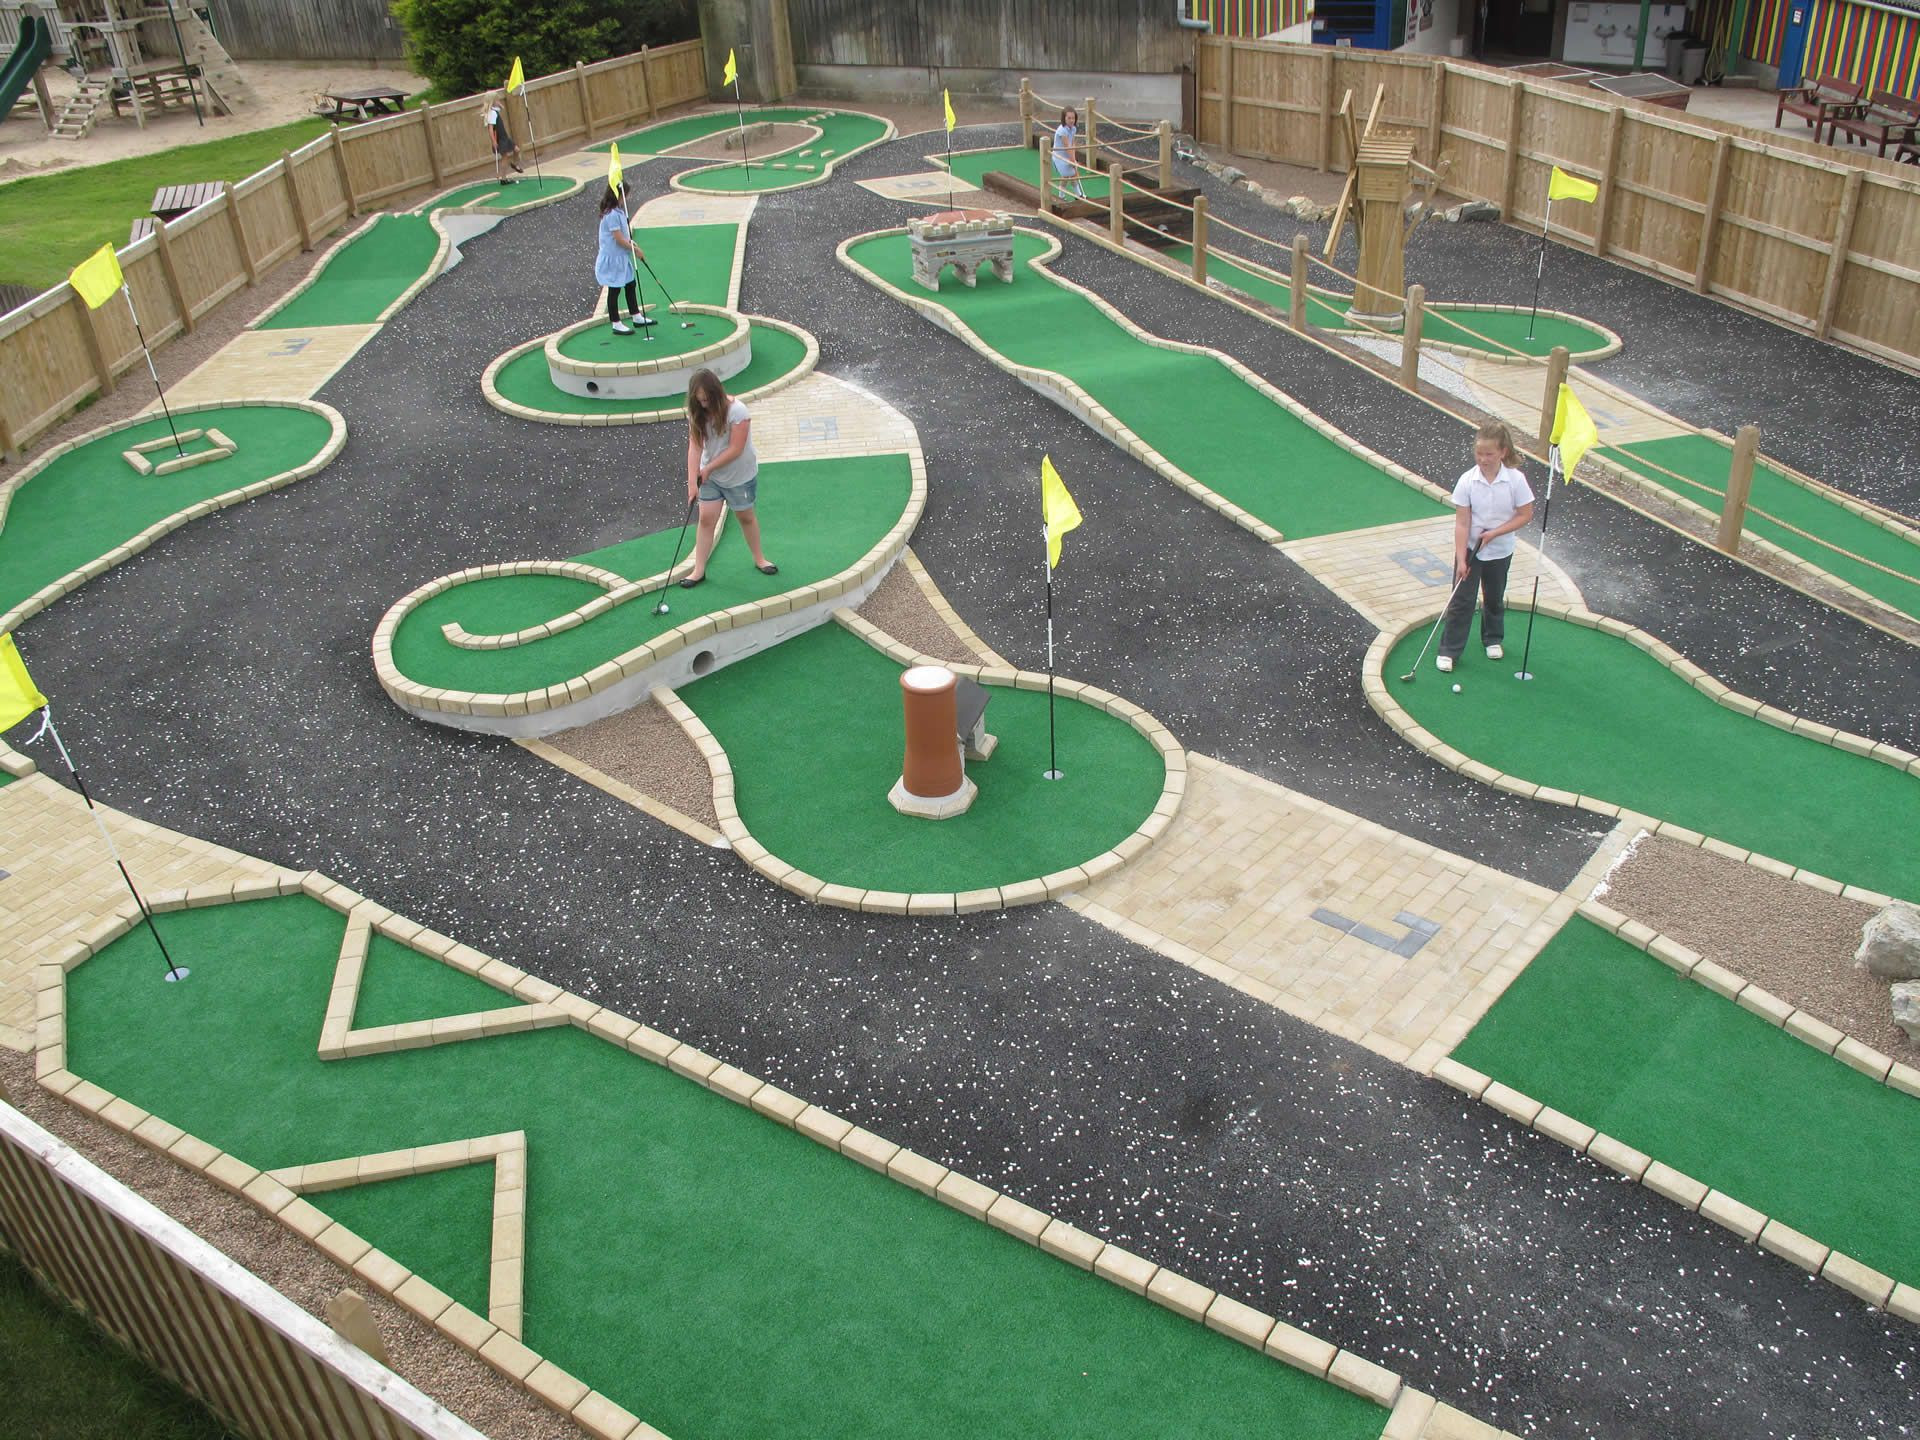 Backyard Miniature Golf
 15 Game Room Ideas You Did Not Know About Pros & Cons